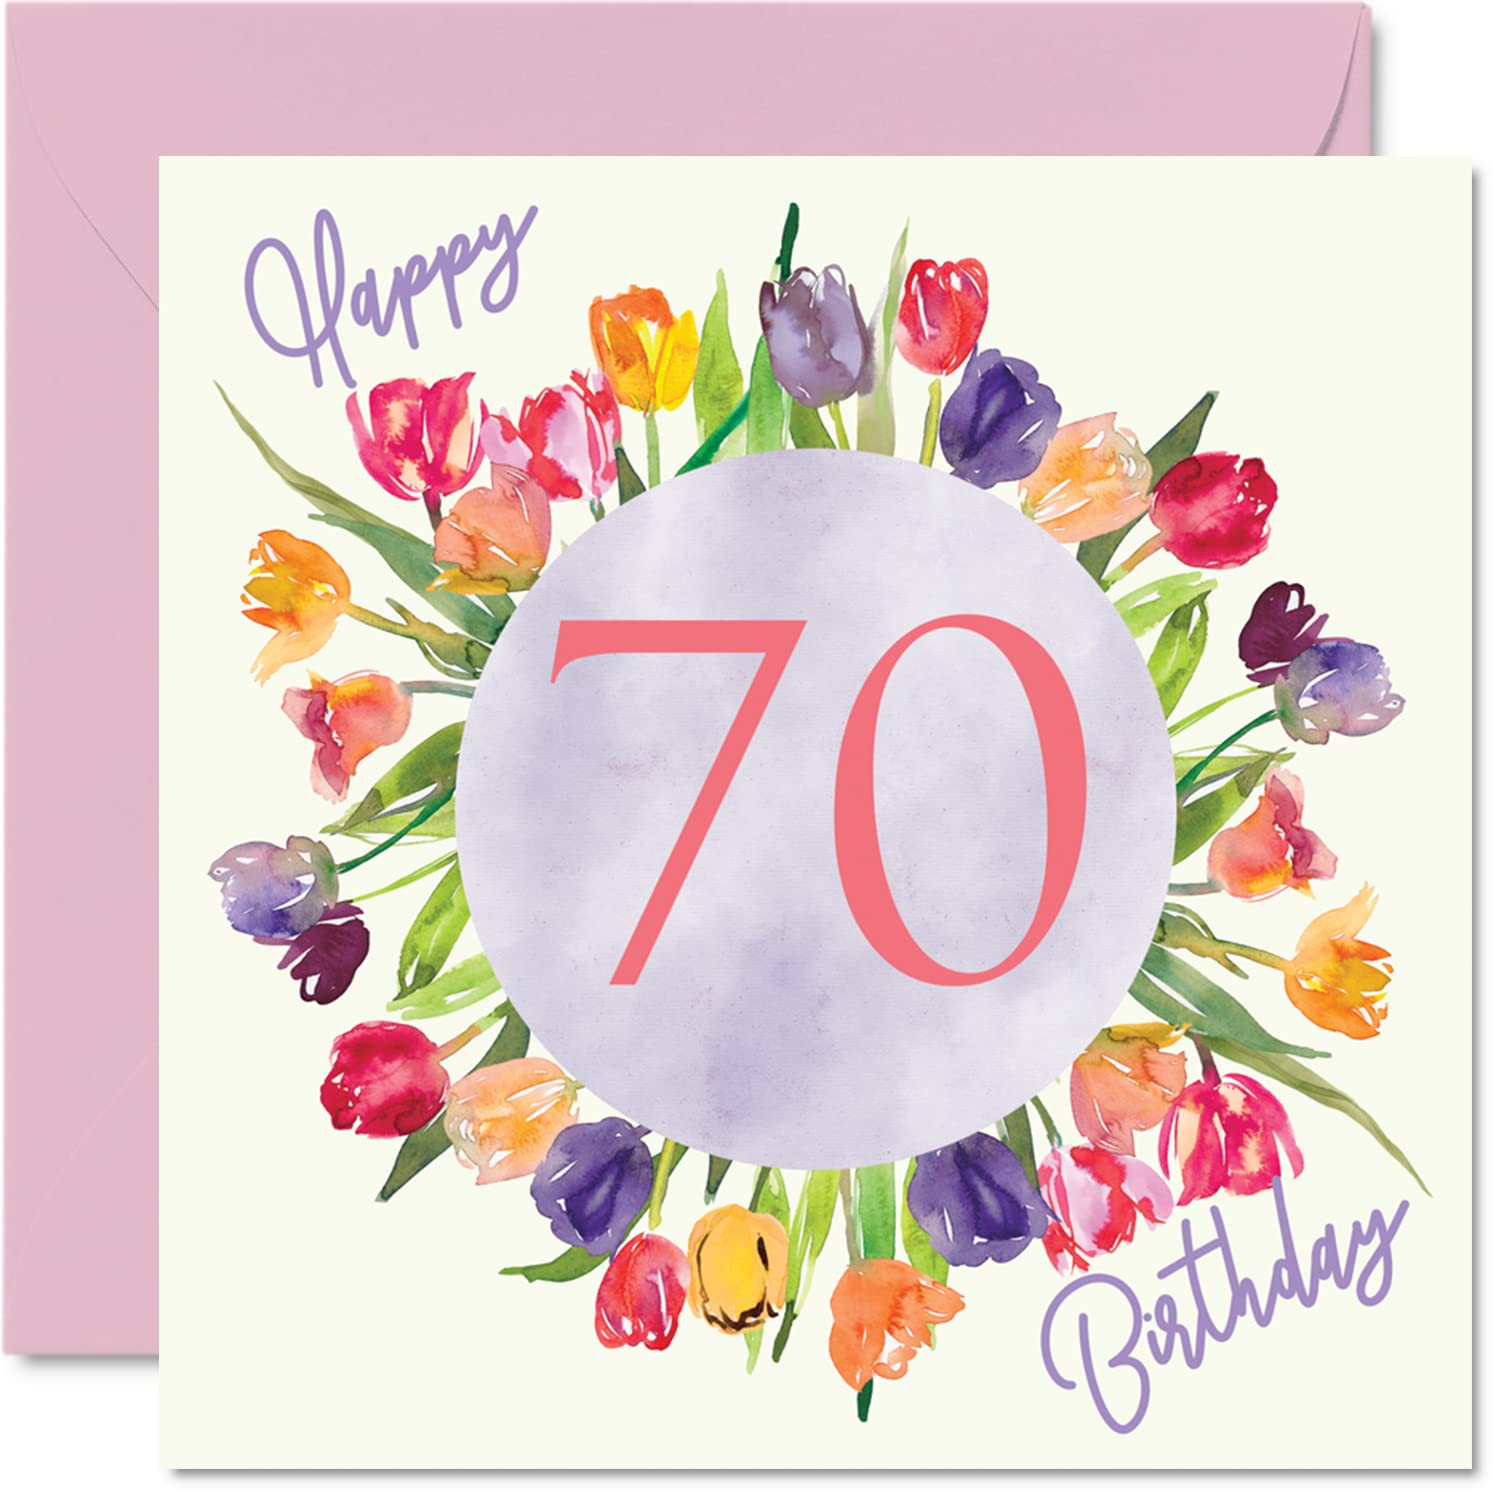 Stuff4 Beautiful 70th Birthday cards for Women - Watercolour Tulips Flowers Bouquet - Happy Birthday card for Her grandma Nanny gran Mo